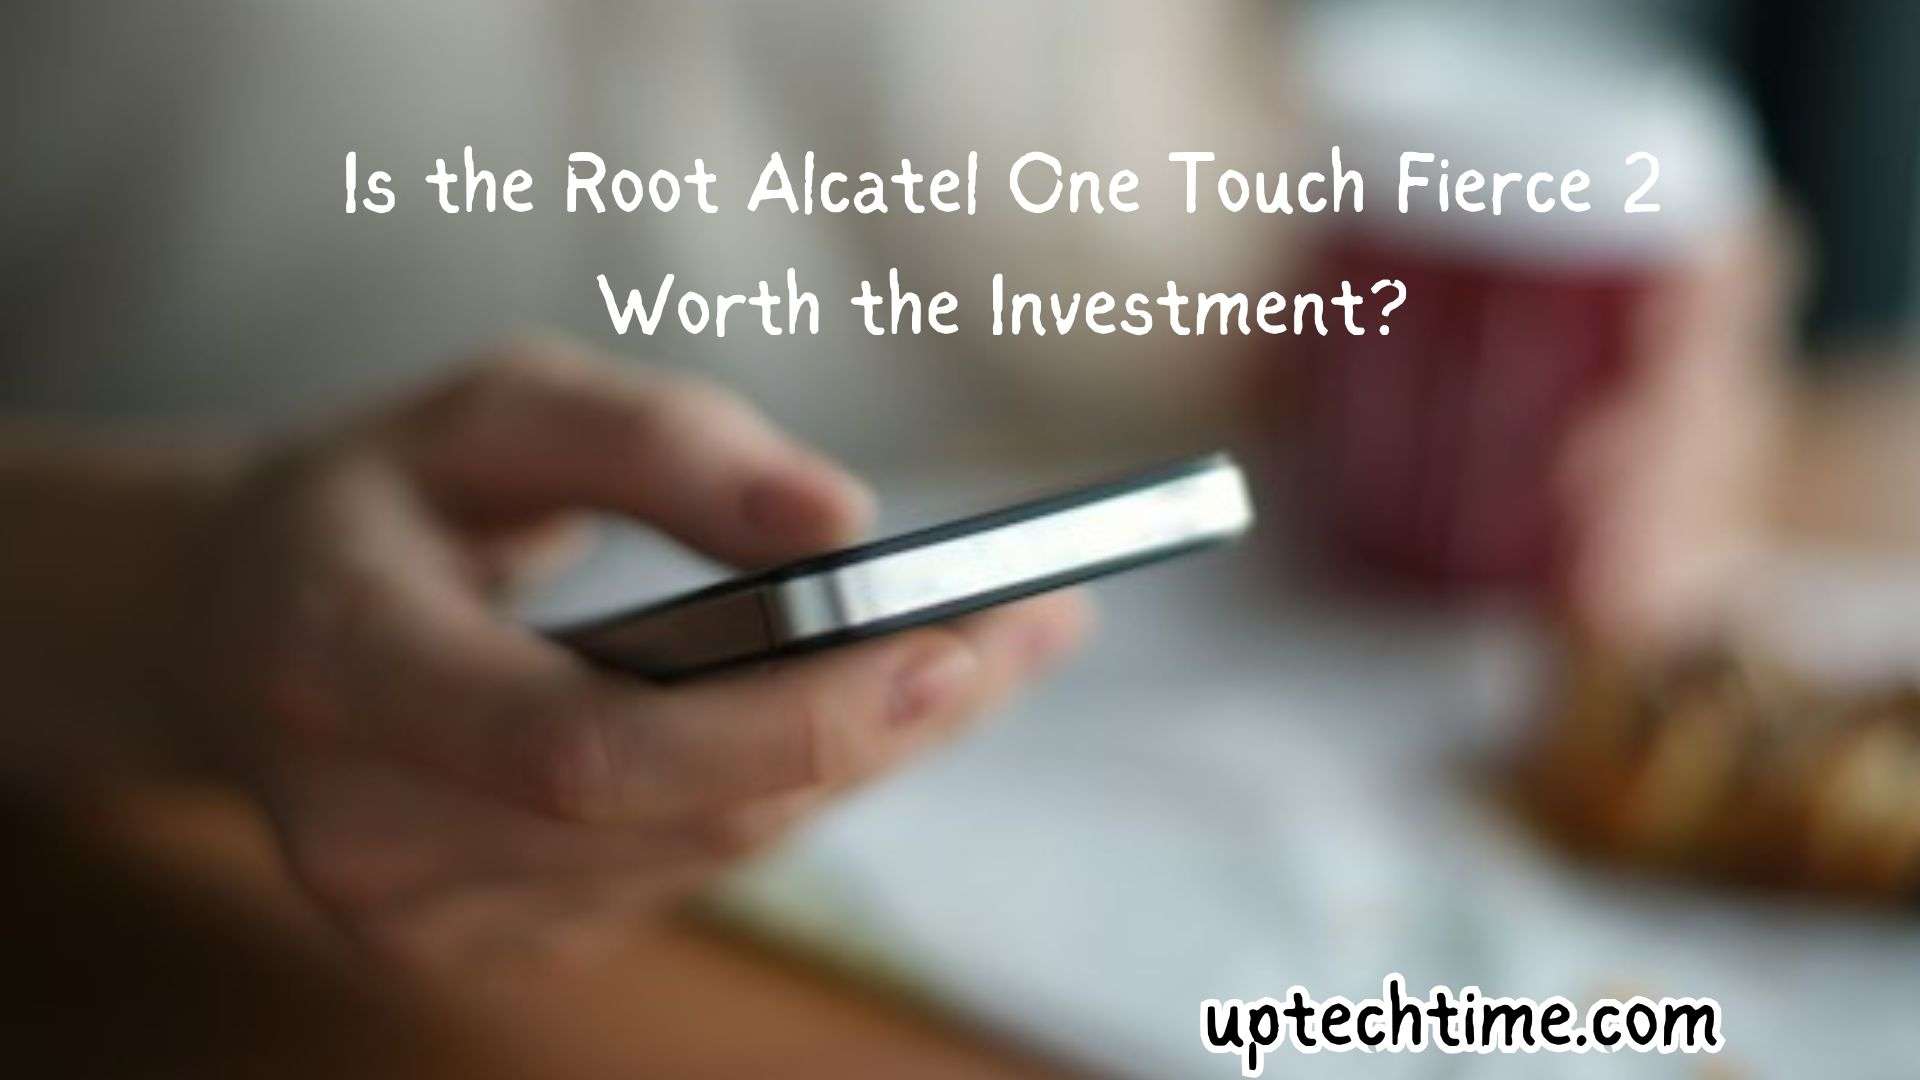 the Root Alcatel One Touch Fierce 2